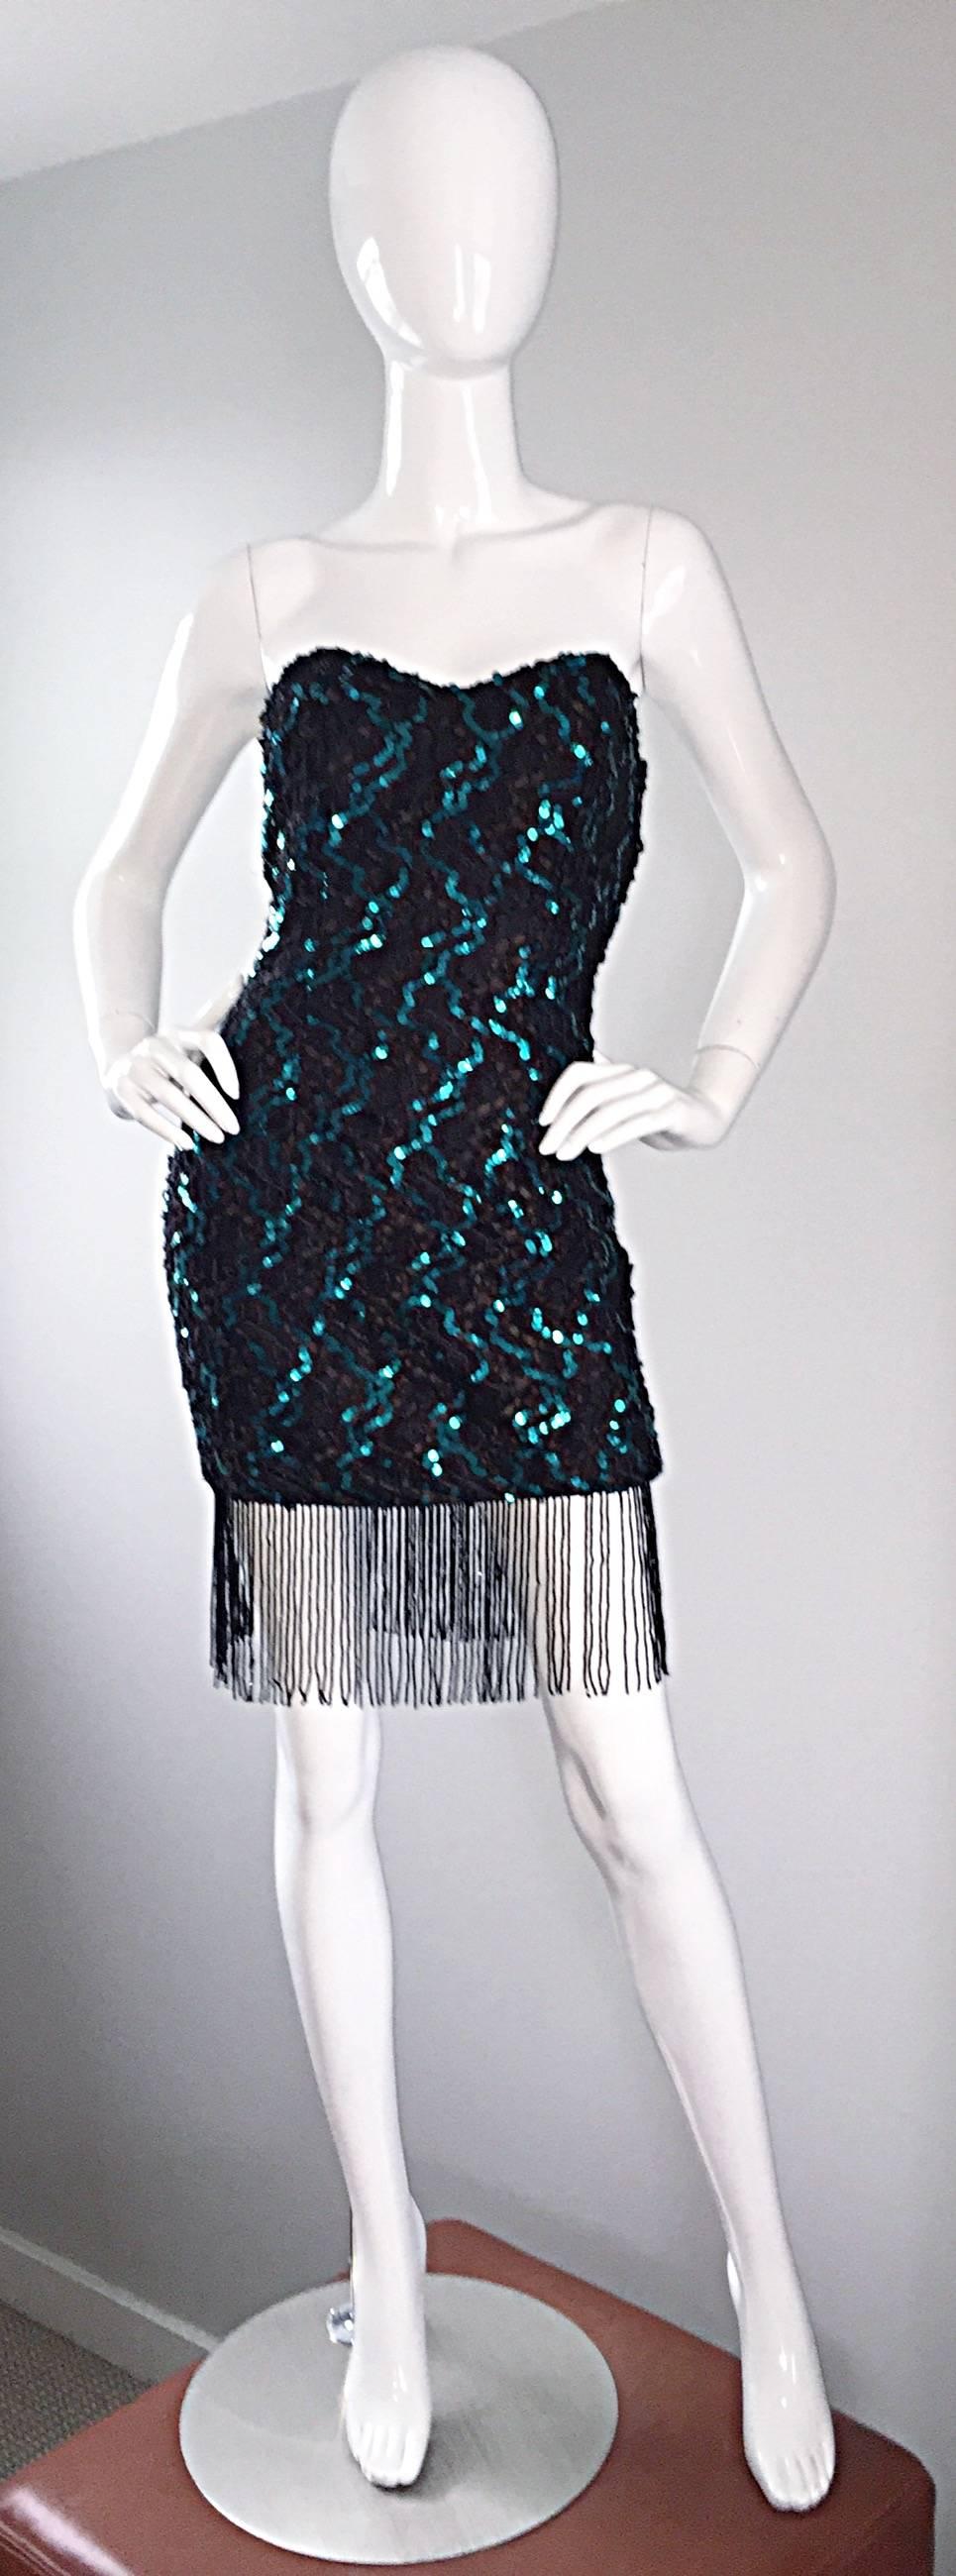 Sexy vintage J. REYNOLDS black and teal lace sequined mini dress, with beaded fringe hem! Amazing hand-sewn teal sequins, with a stunning black lace backdrop. Beaded fringe hem looks amazing on the dance floor! Hidden zipper up the back, with